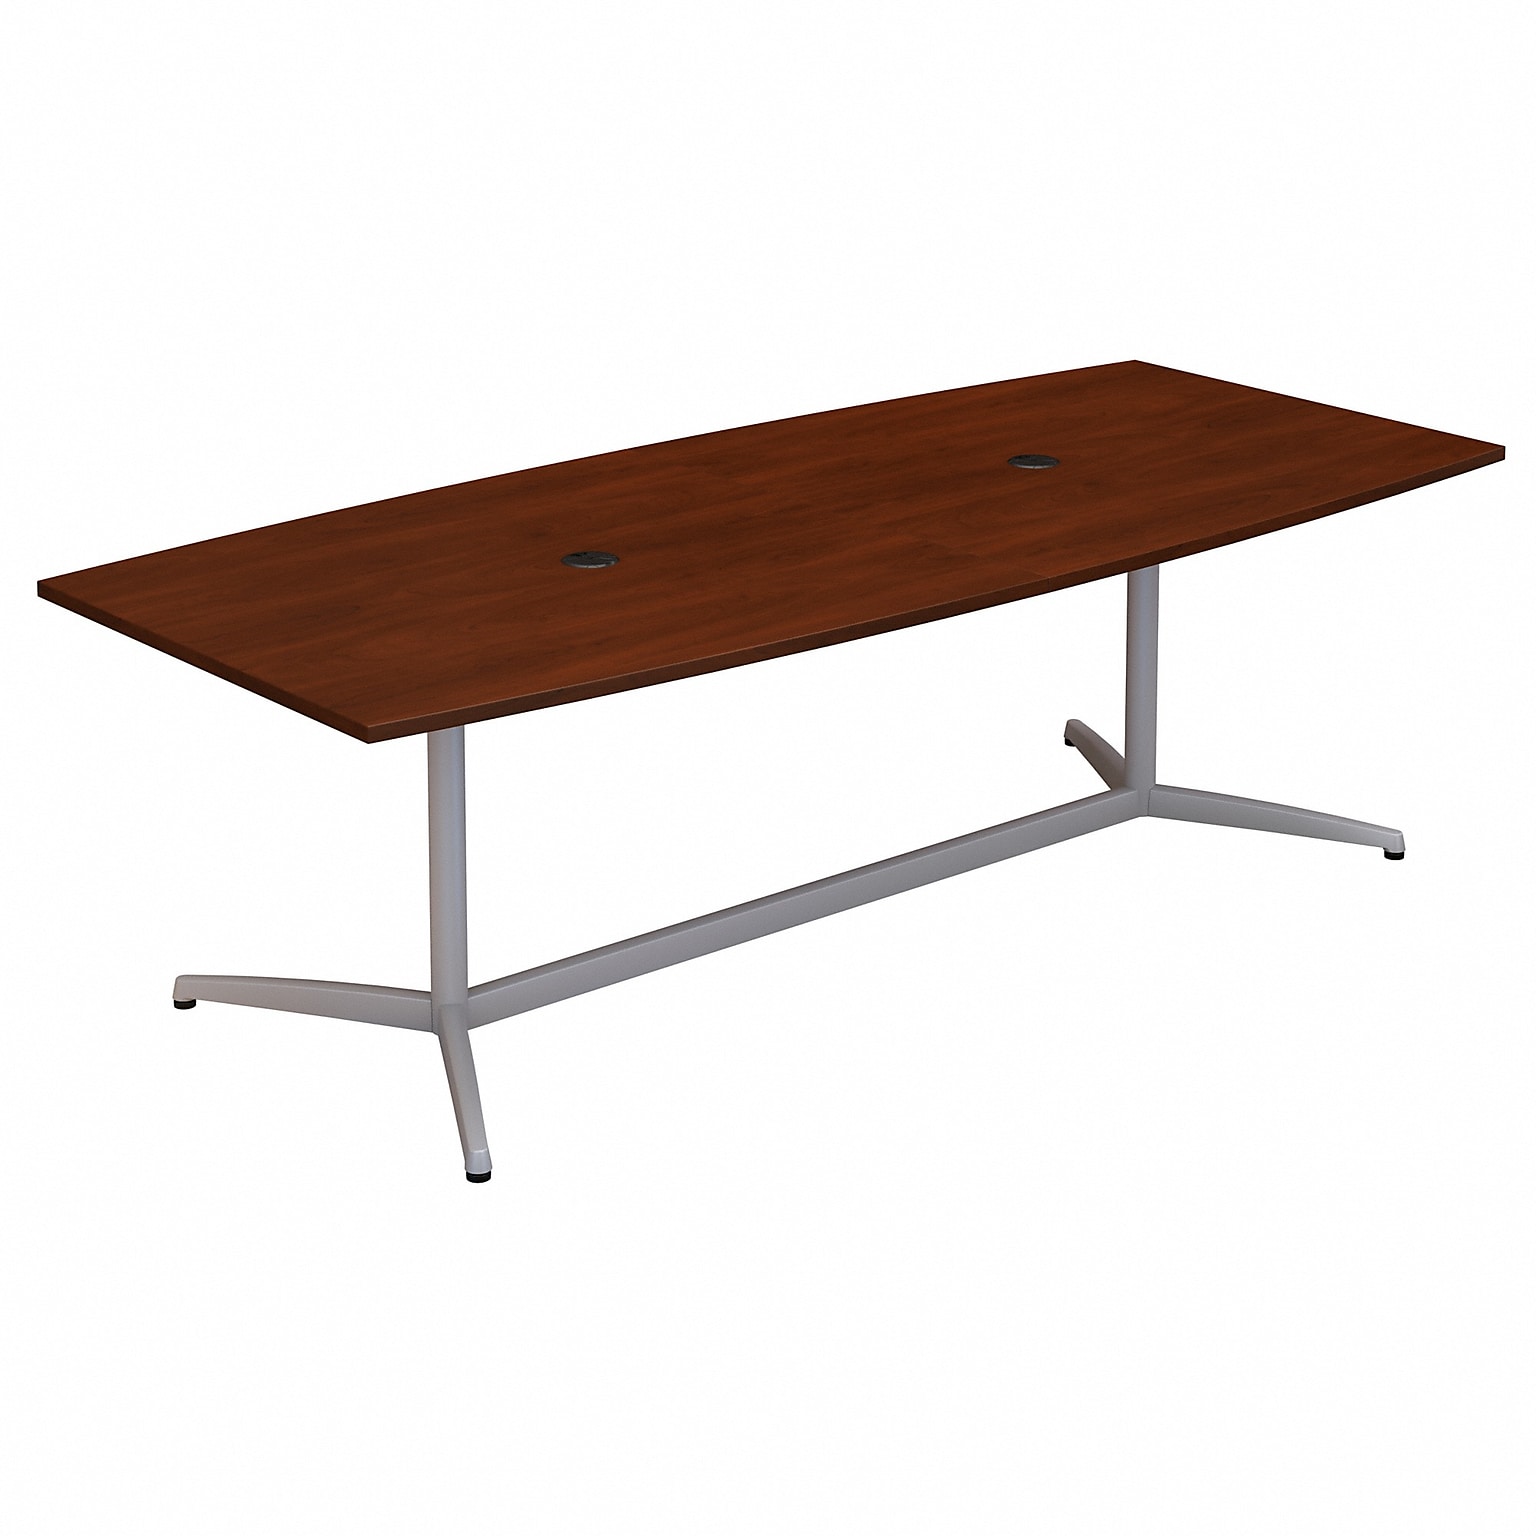 Bush Business Furniture 96W x 42D Boat Shaped Conference Table with Metal Base, Hansen Cherry (99TBM96HCSVK)